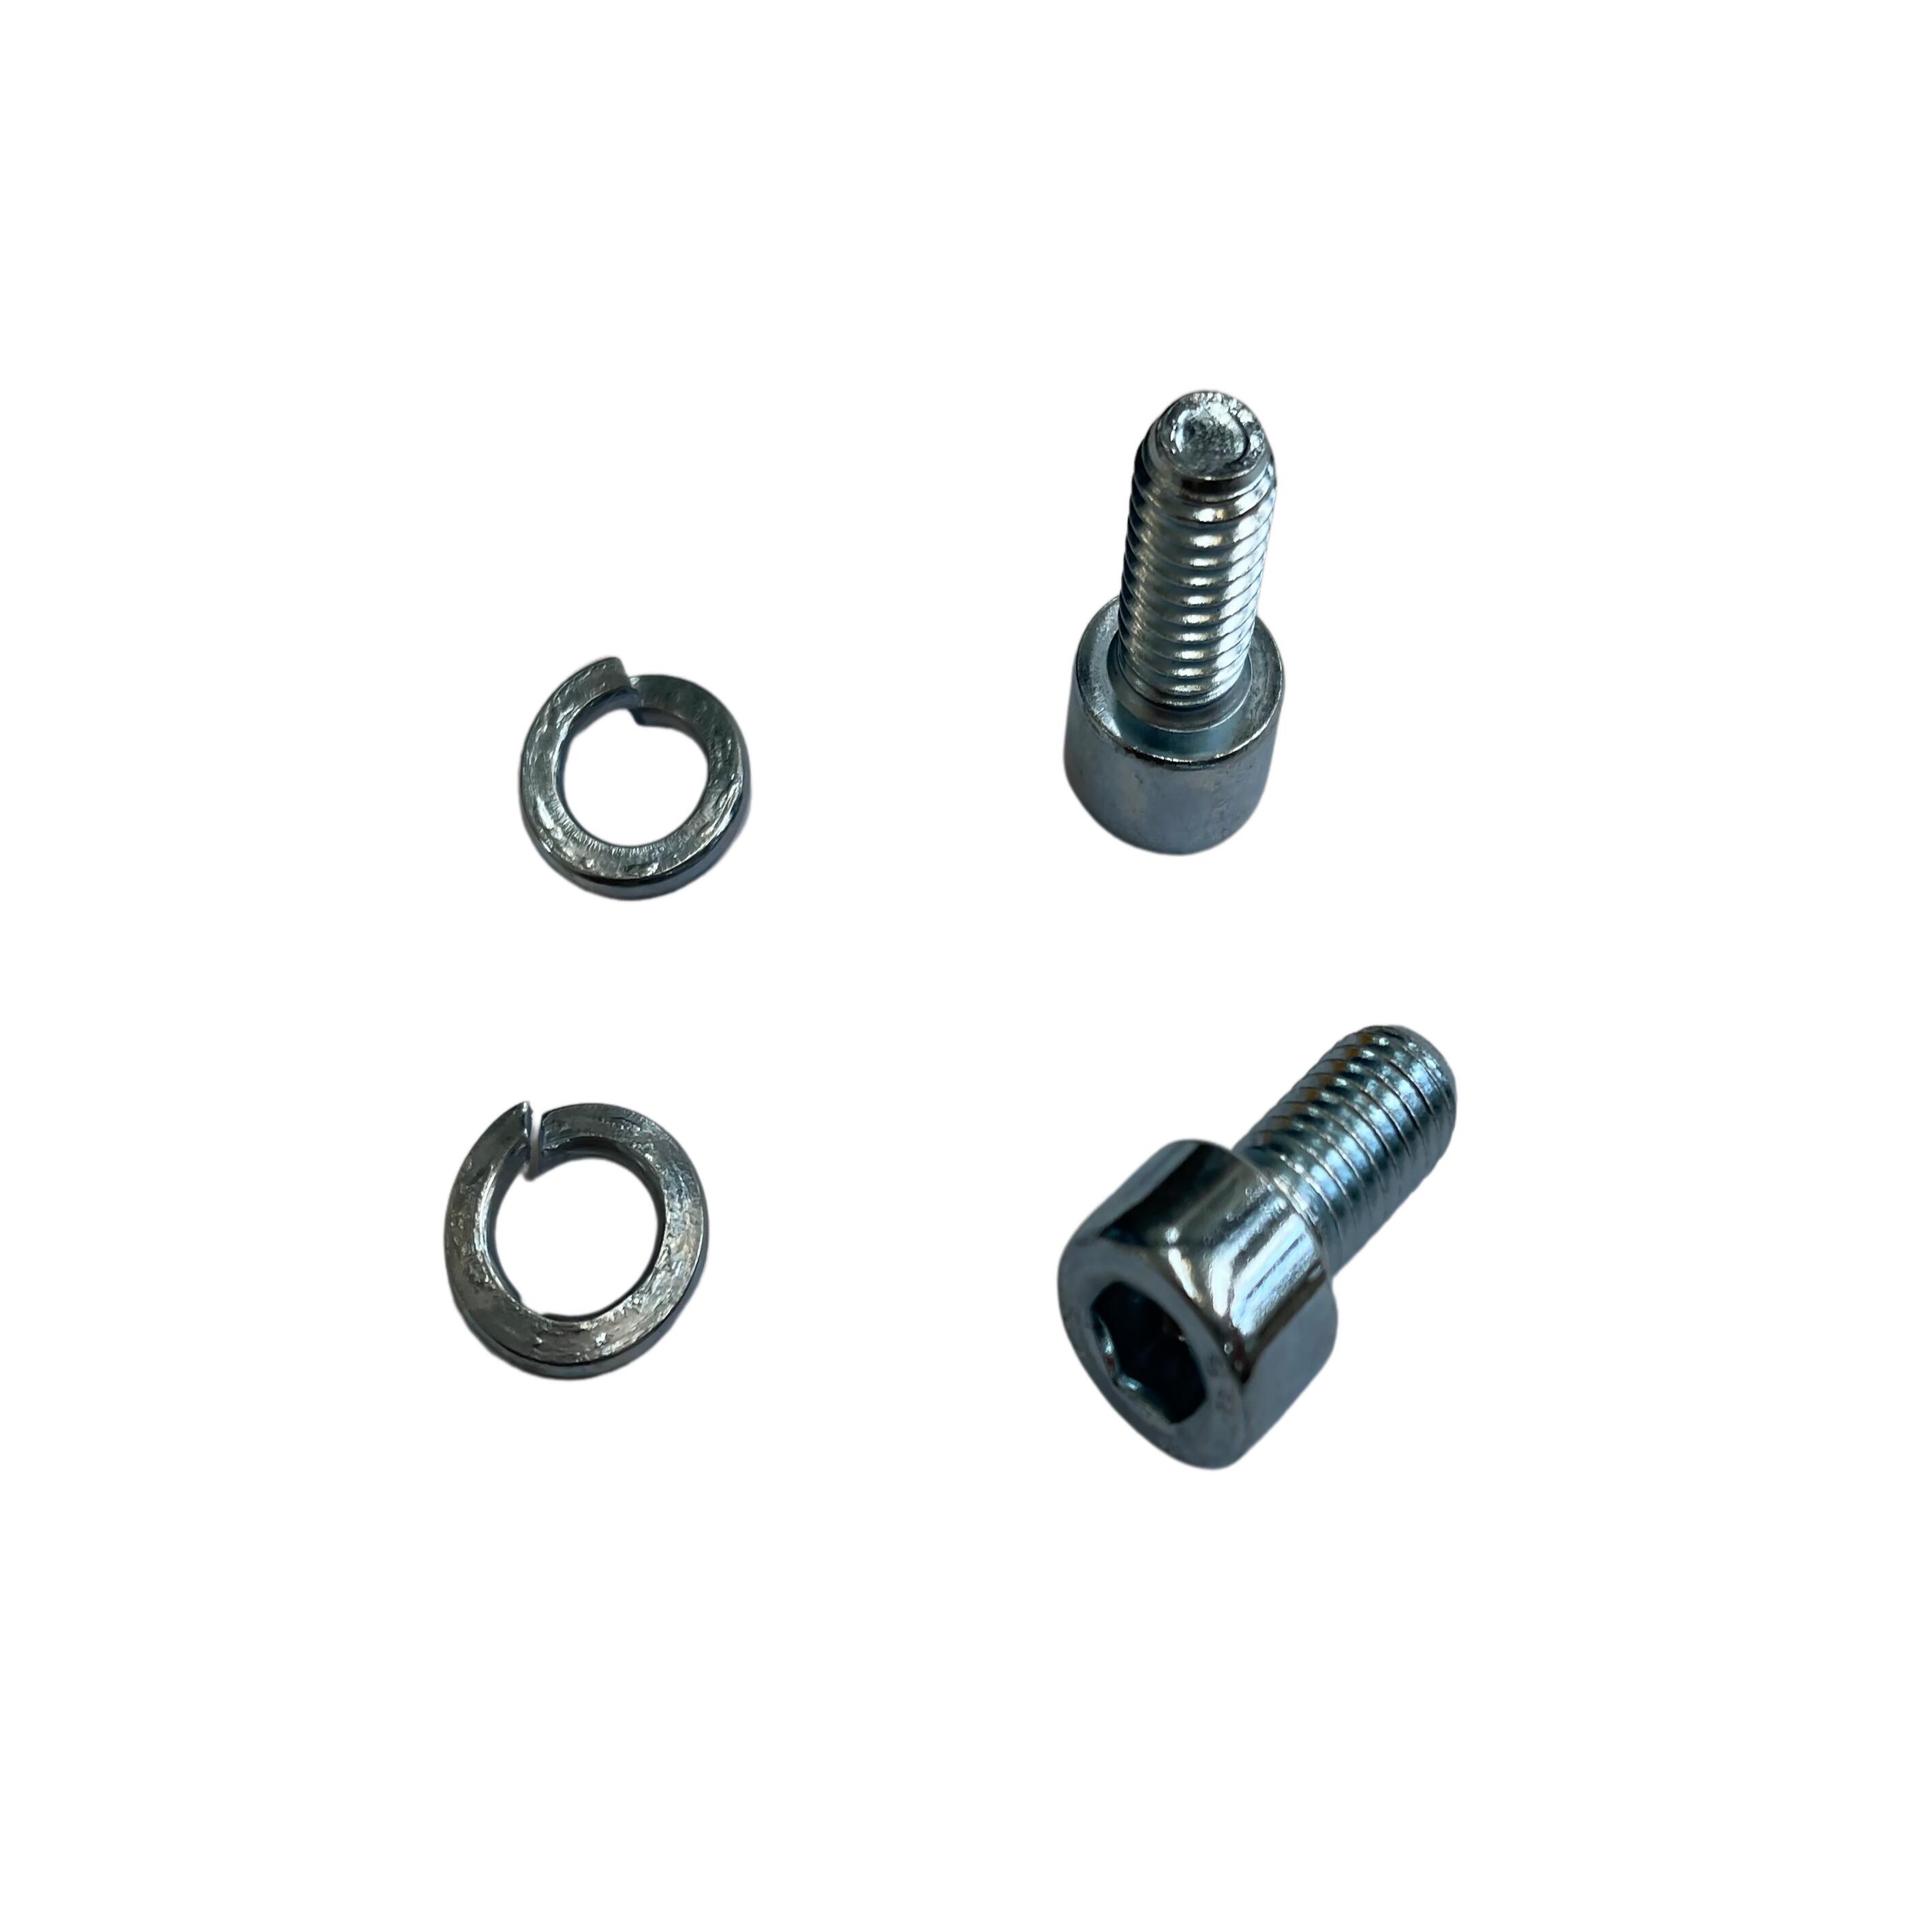 Image of "Screws For 14"" & 16"" Stabilizer"